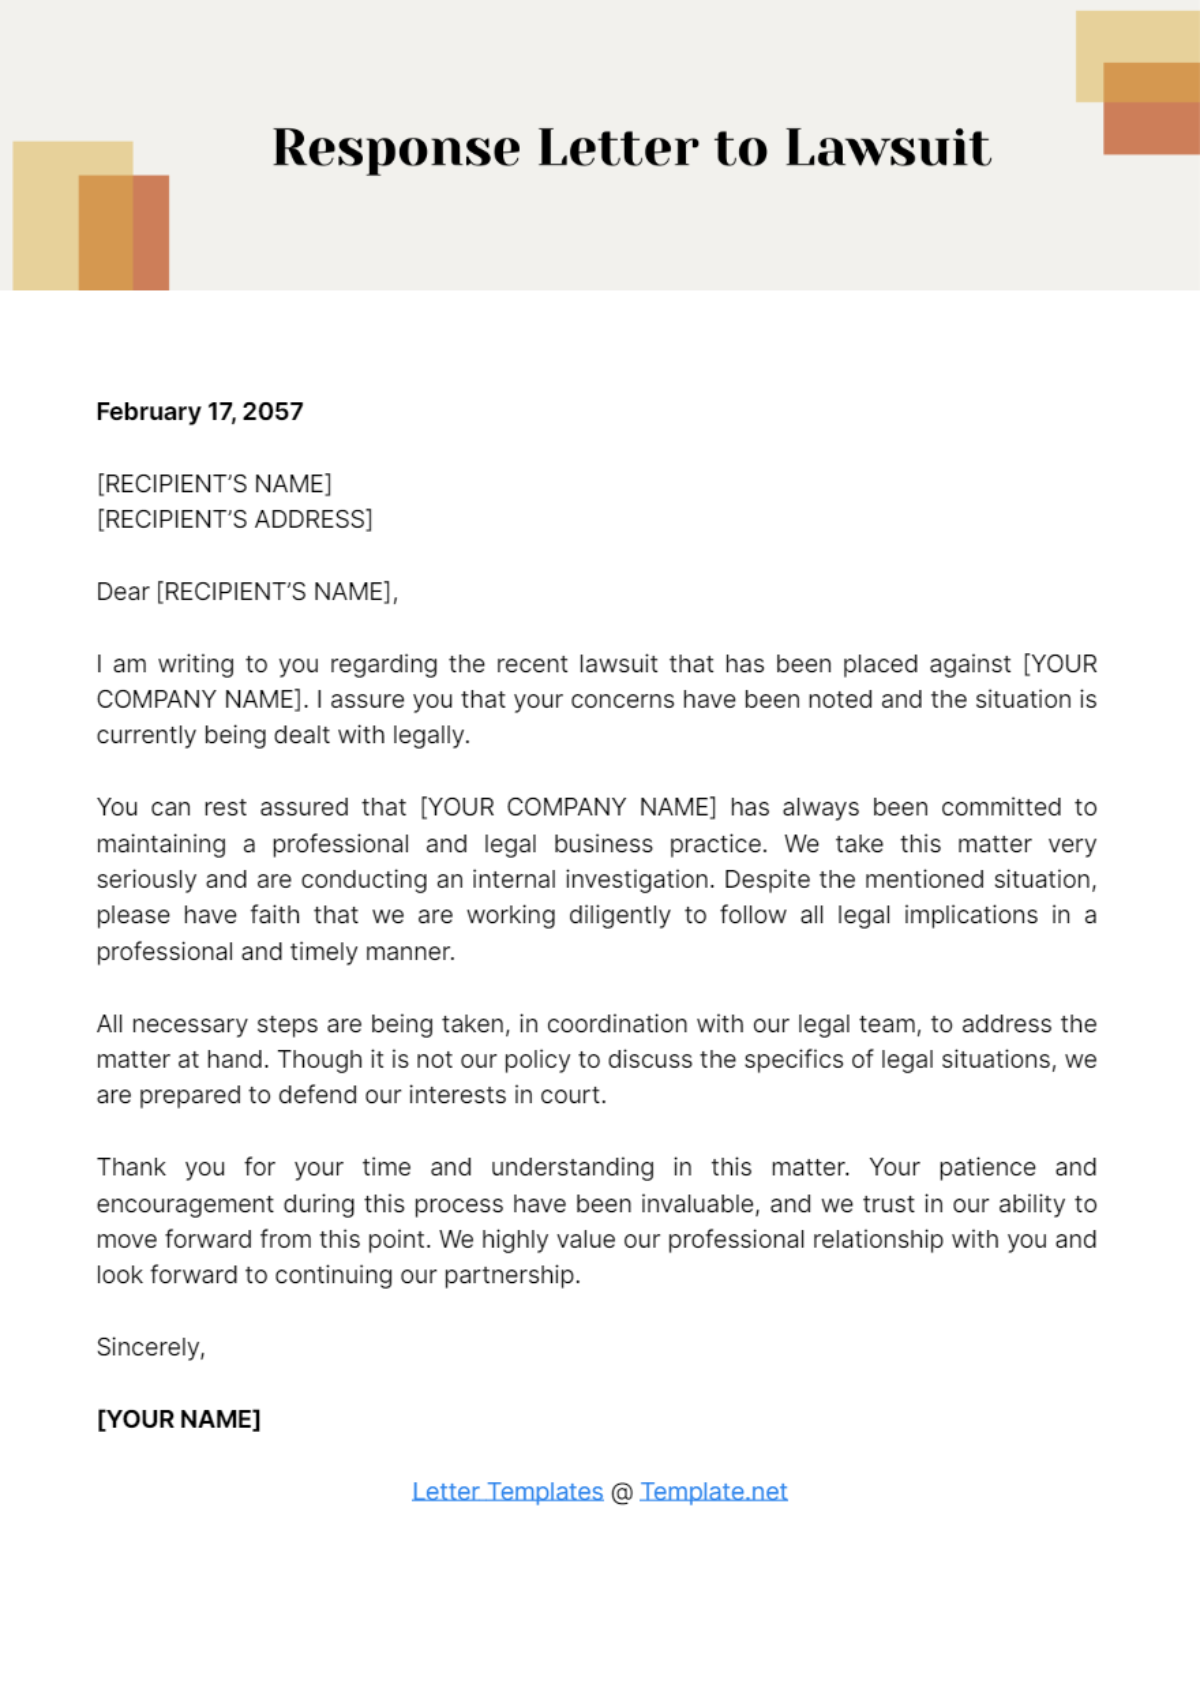 Free Response Letter to Lawsuit Template